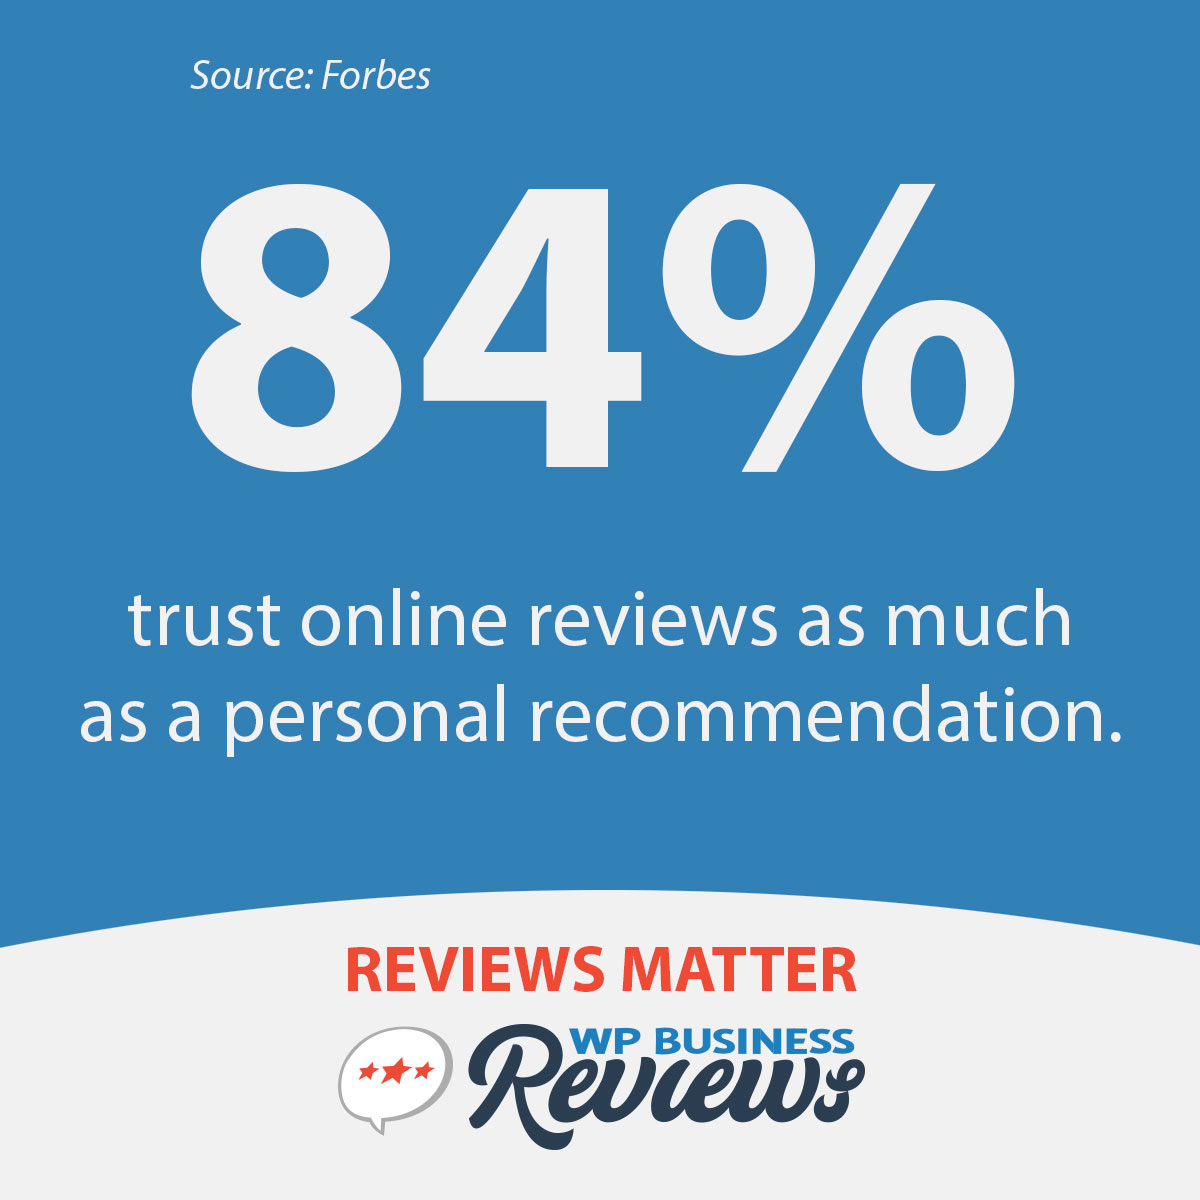 Forbes says that 84% of people trust online reviews as much as a personal recommendation.